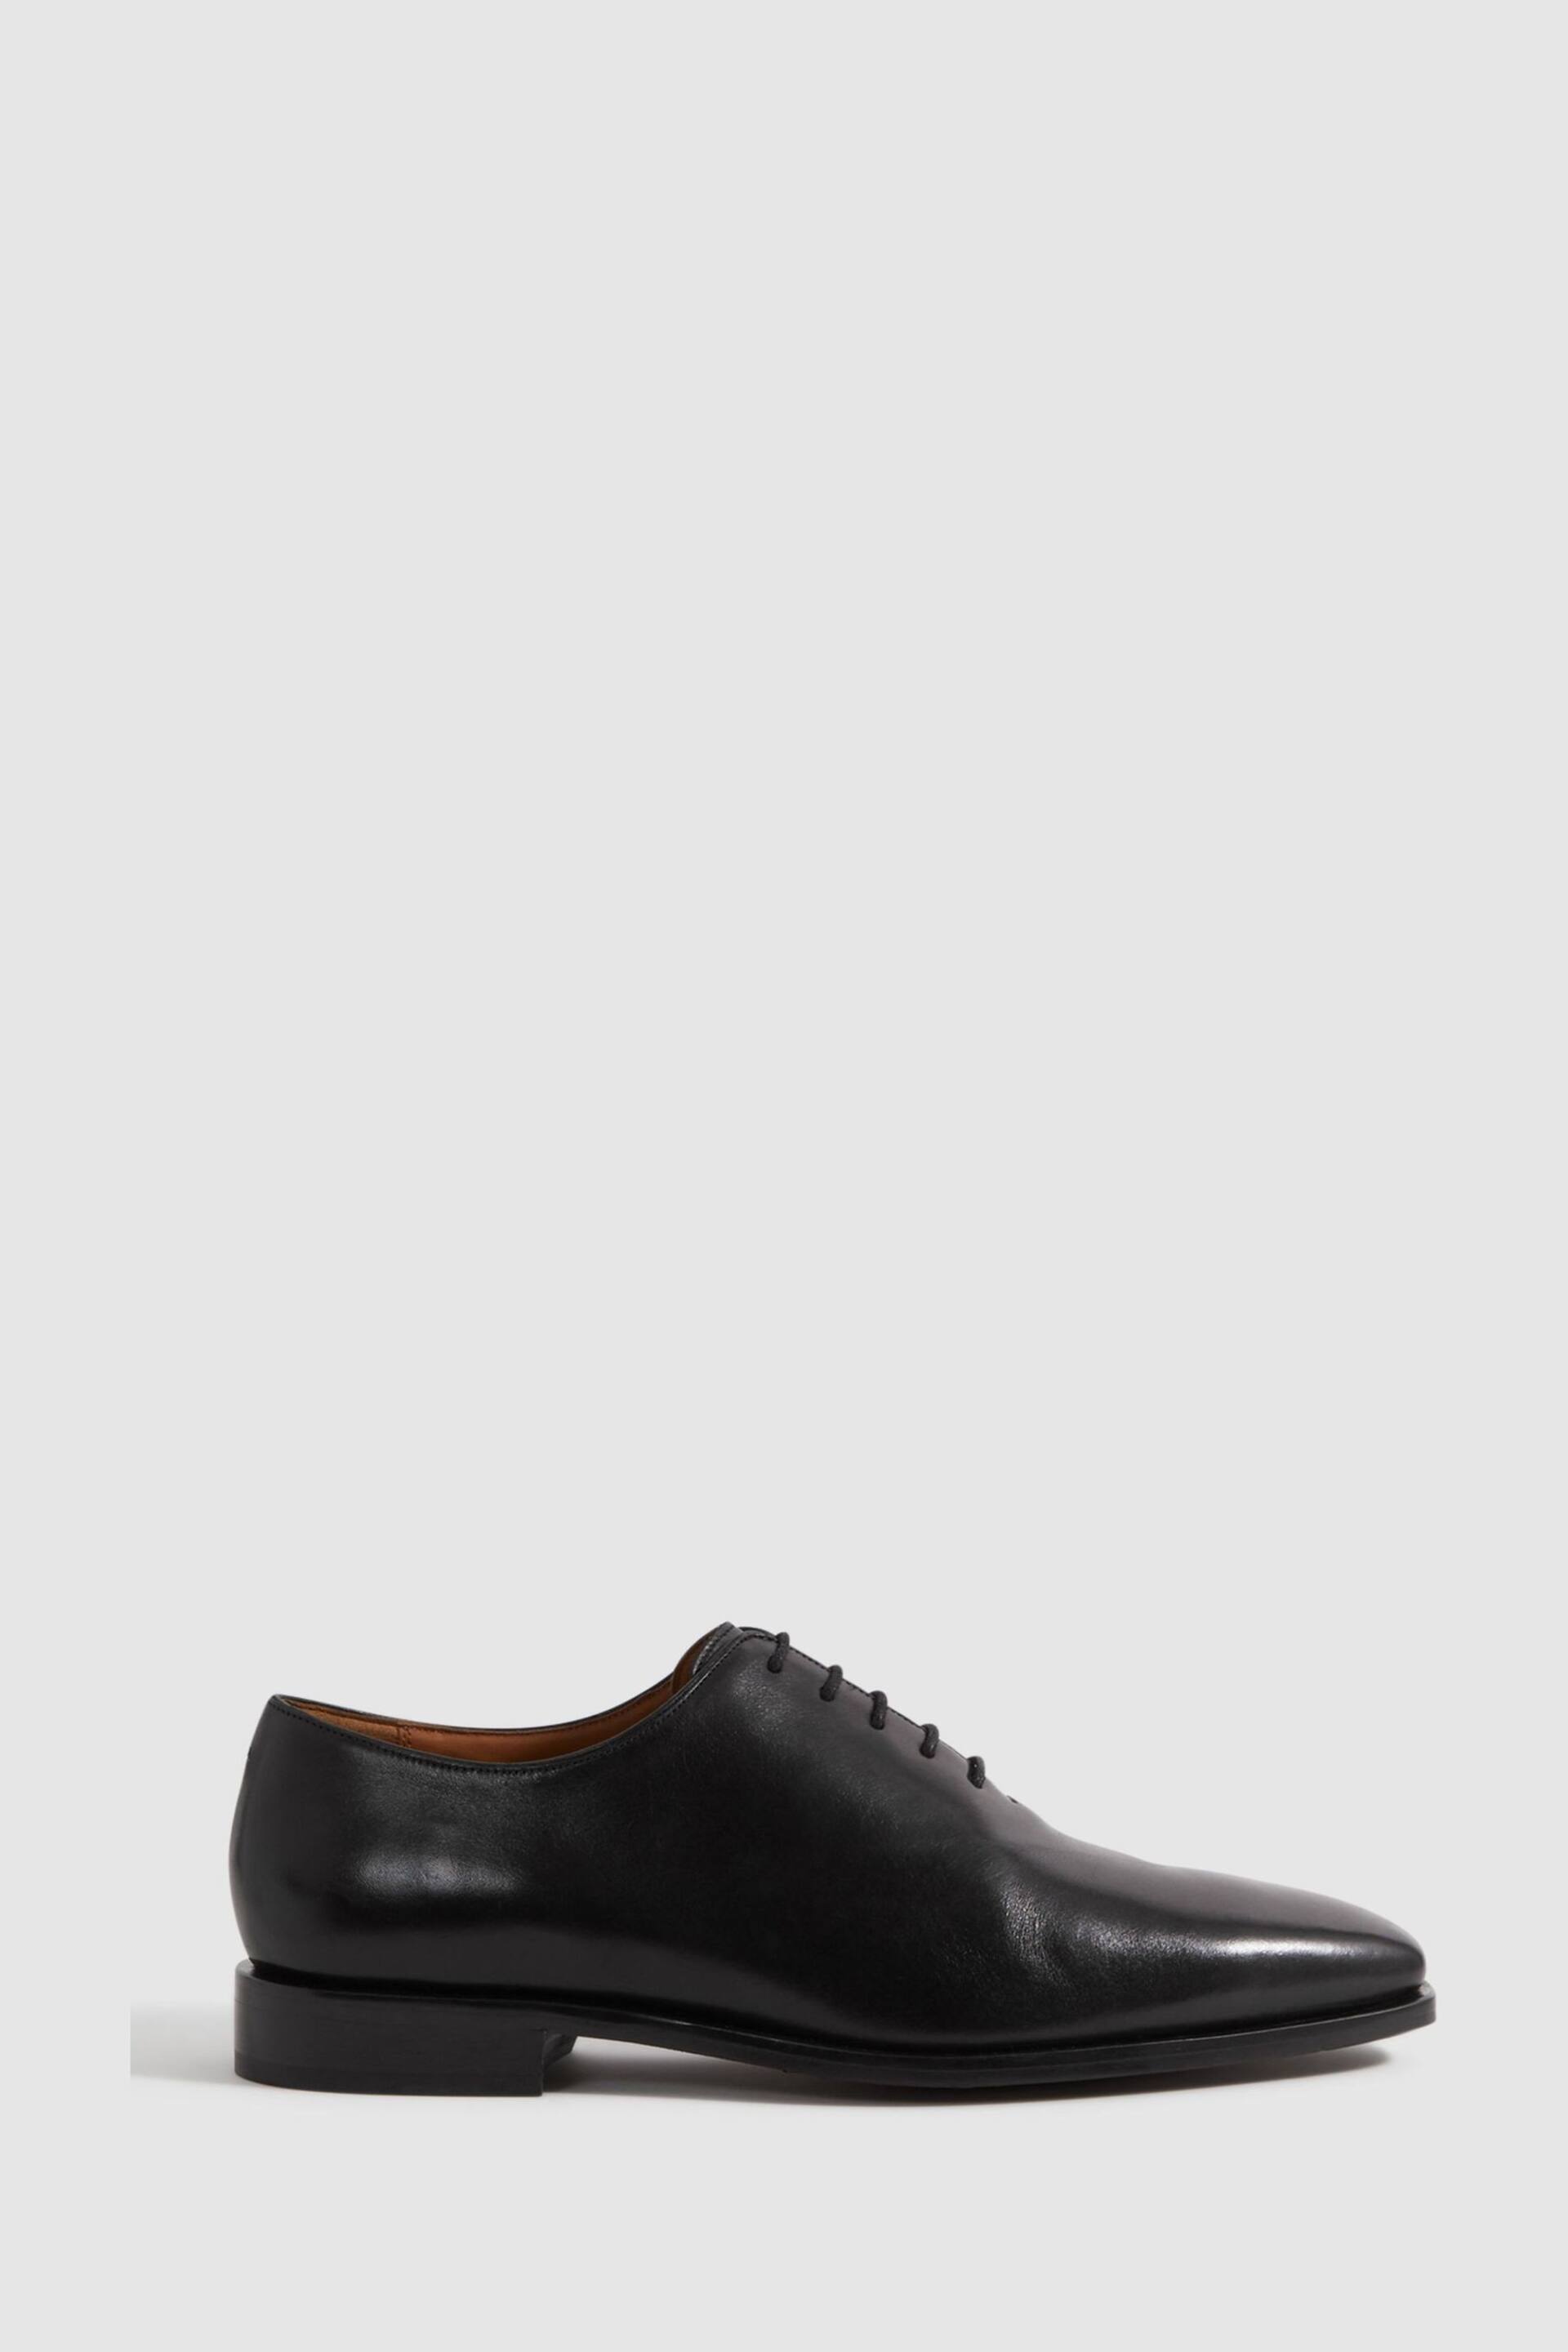 Reiss Black Mead Leather Lace-Up Shoes - Image 1 of 5